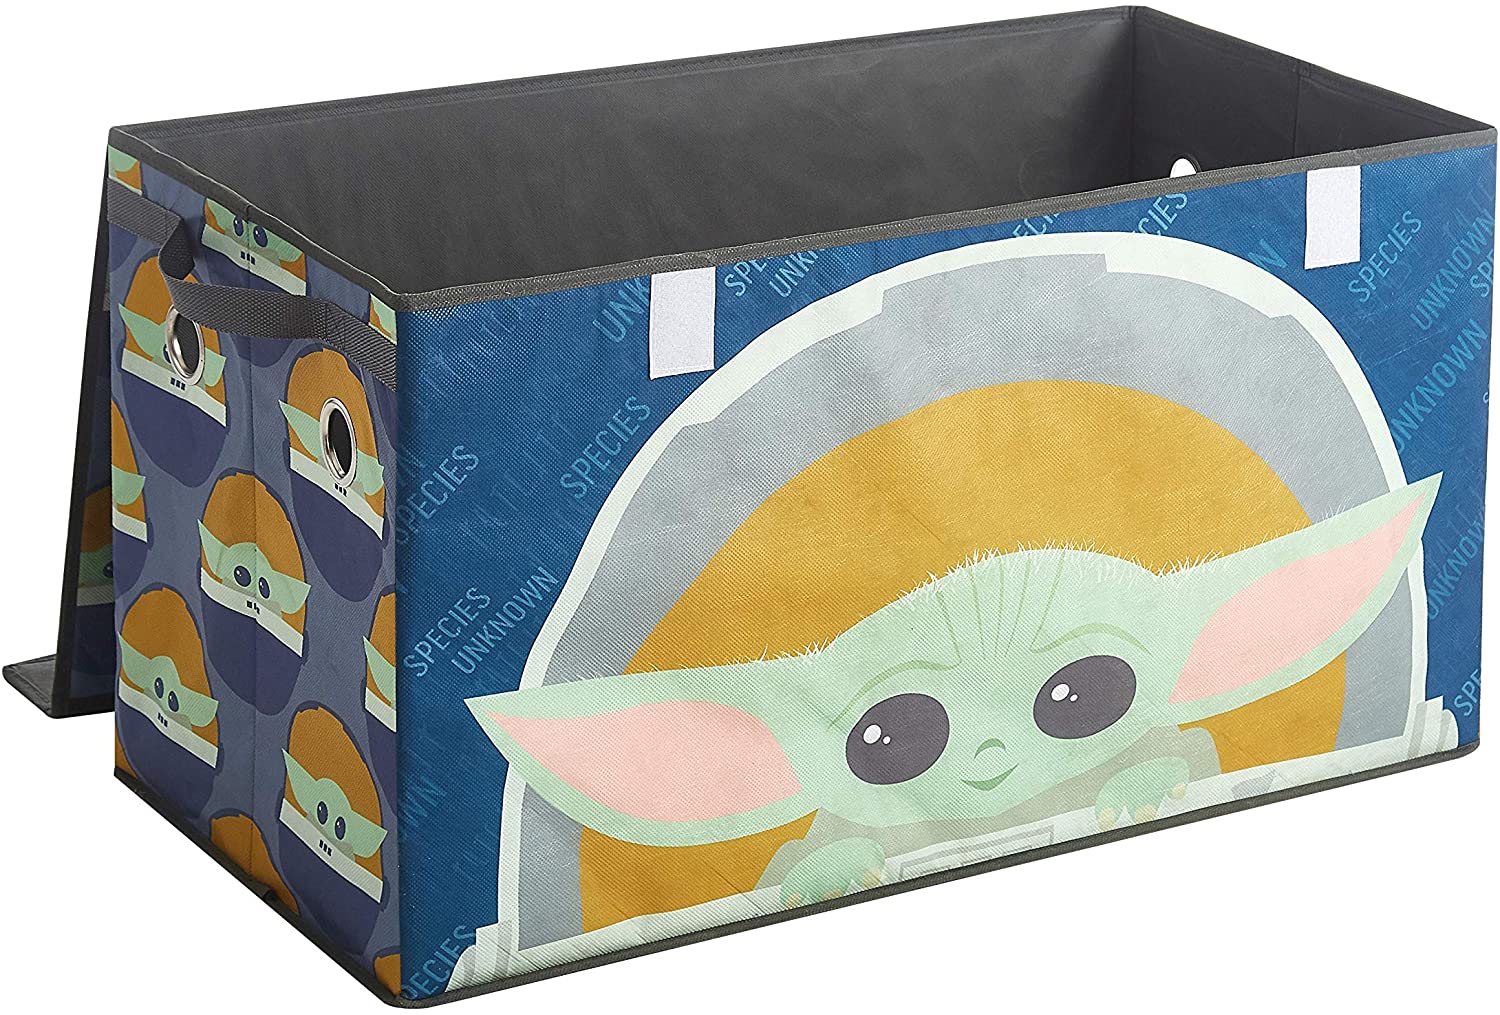 TM The Child Collapsible Toy Storage Trunk 2